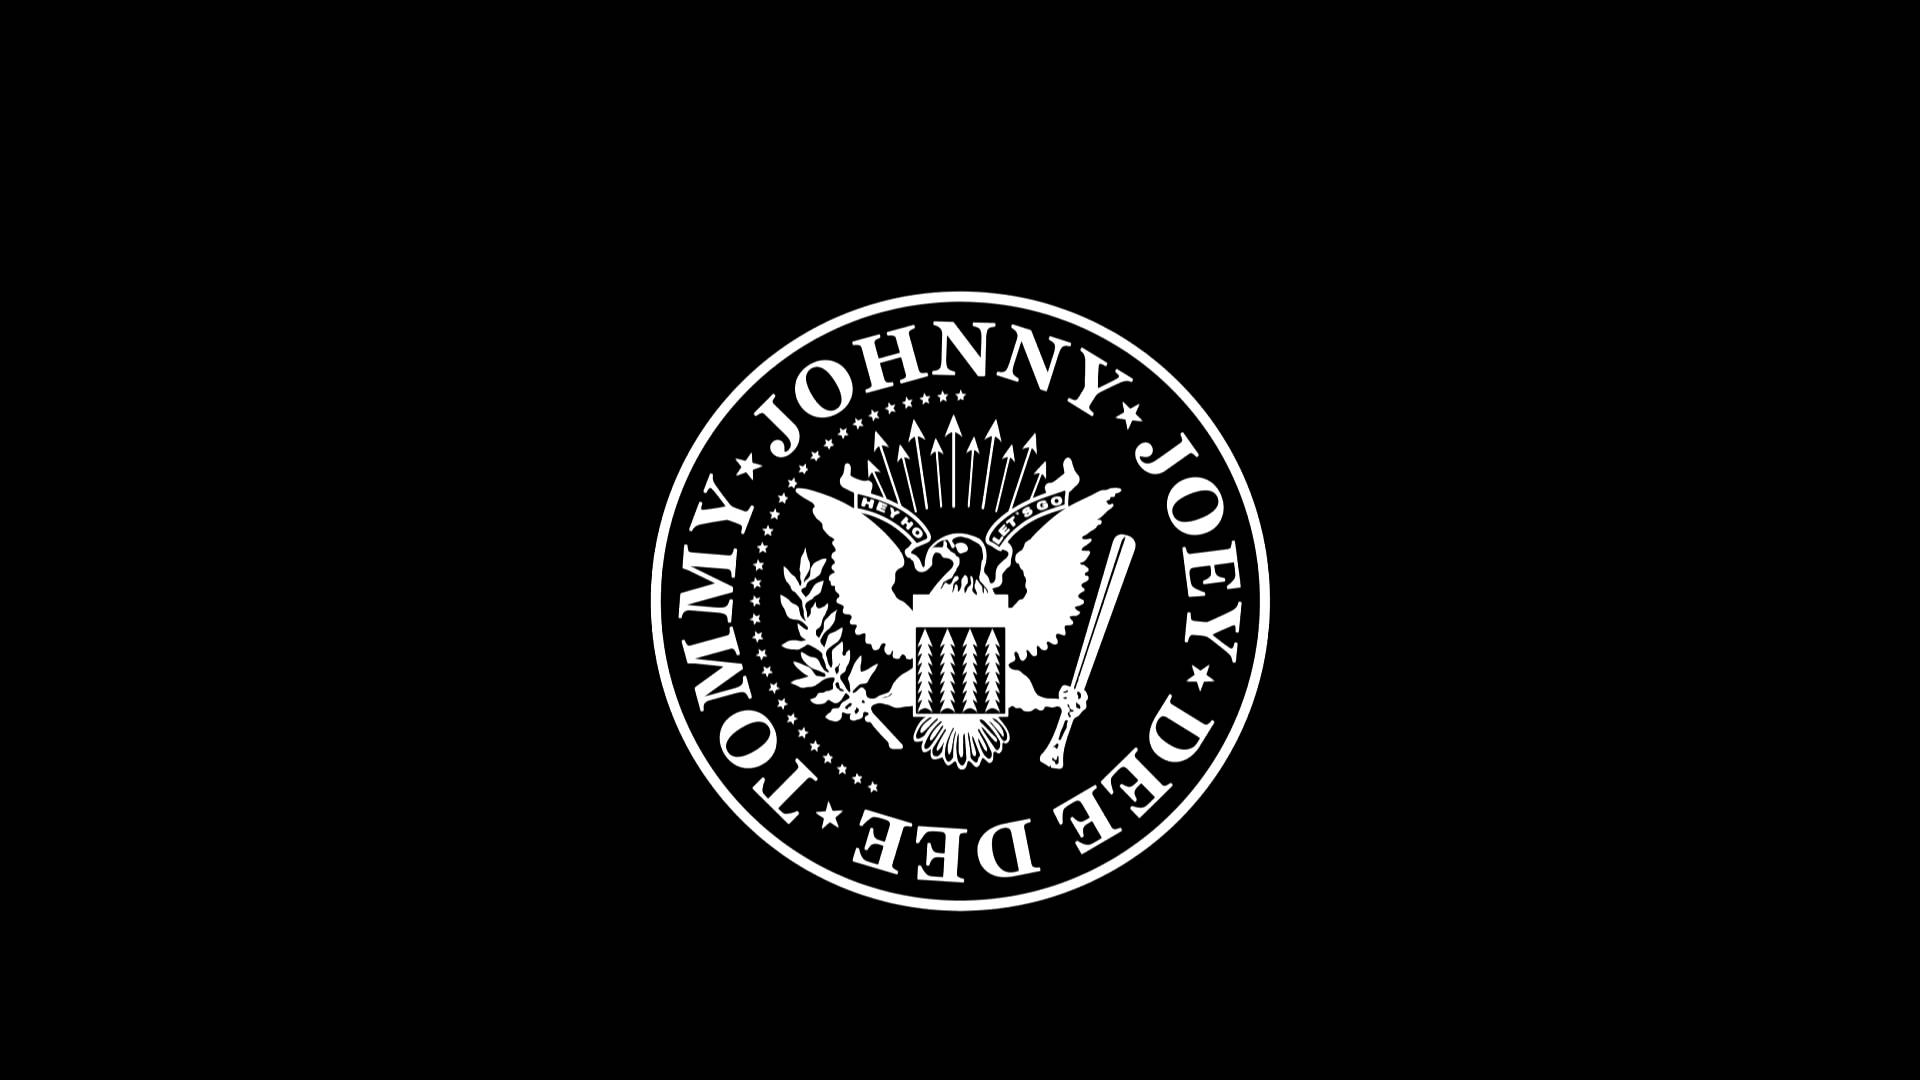 Ramones Logo Wallpapers For Android - Wallpaper Cave